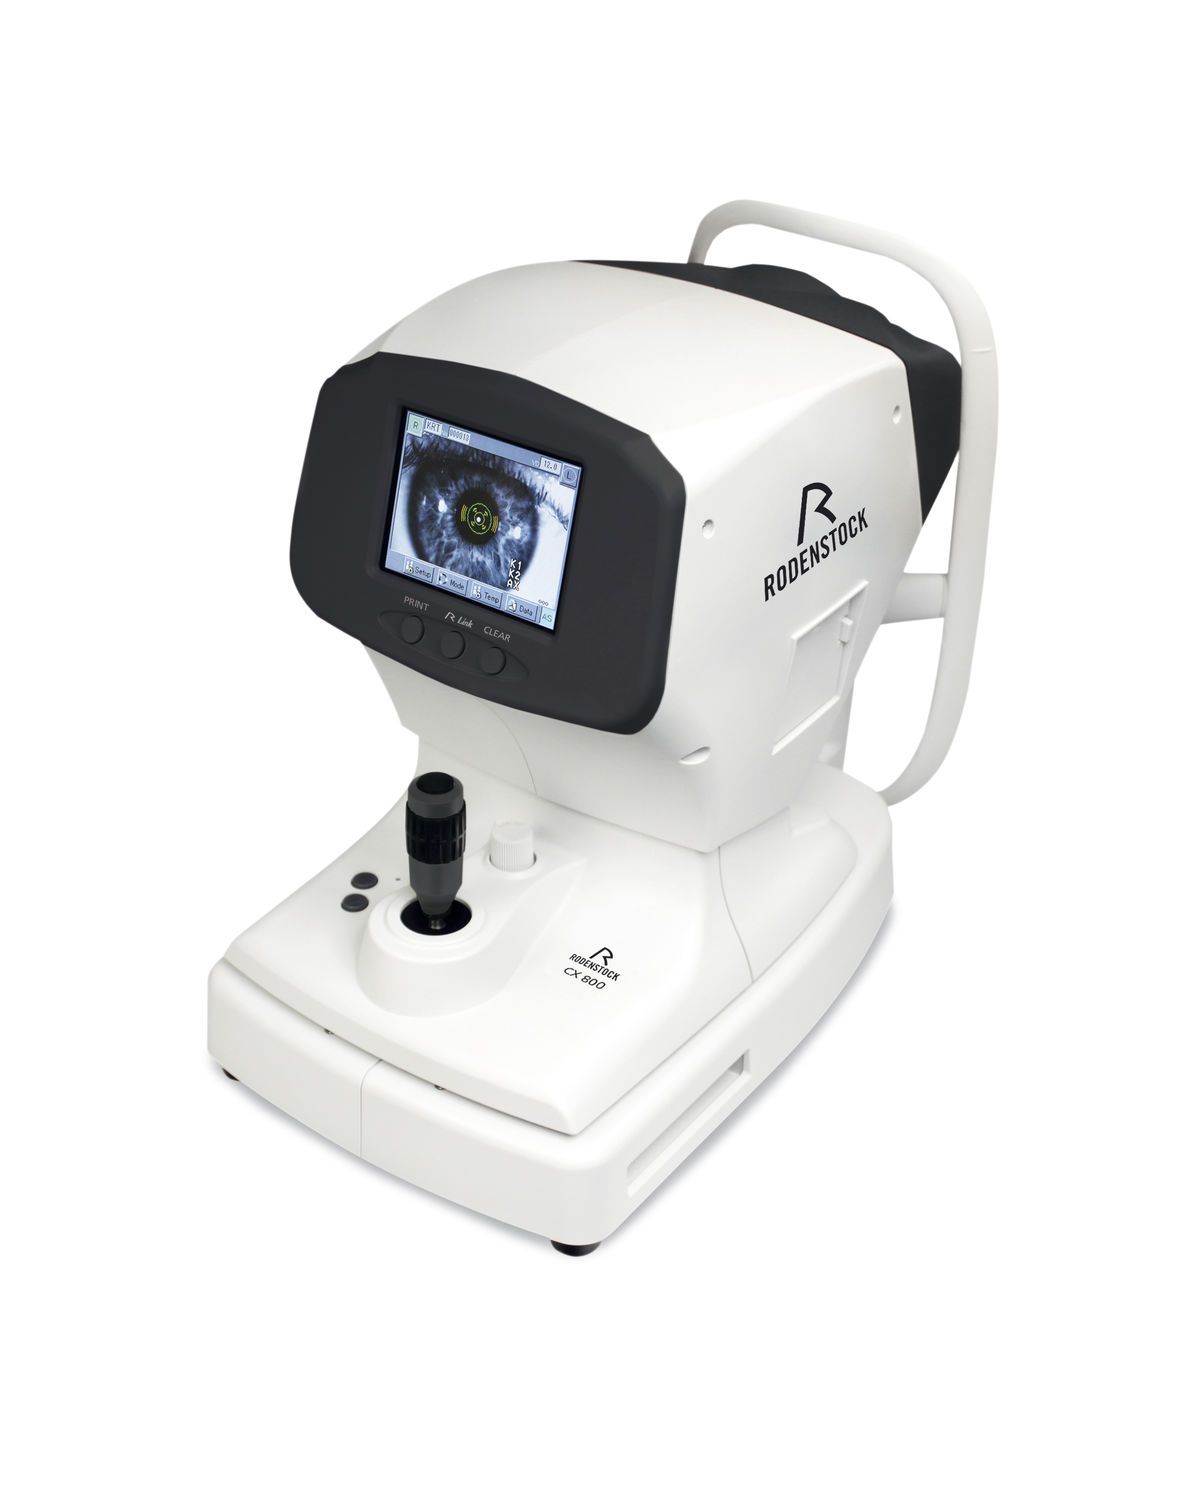 Automatic refractometer (ophthalmic examination) / pupil meter / keratometer CX 800 Rodenstock Instrumente